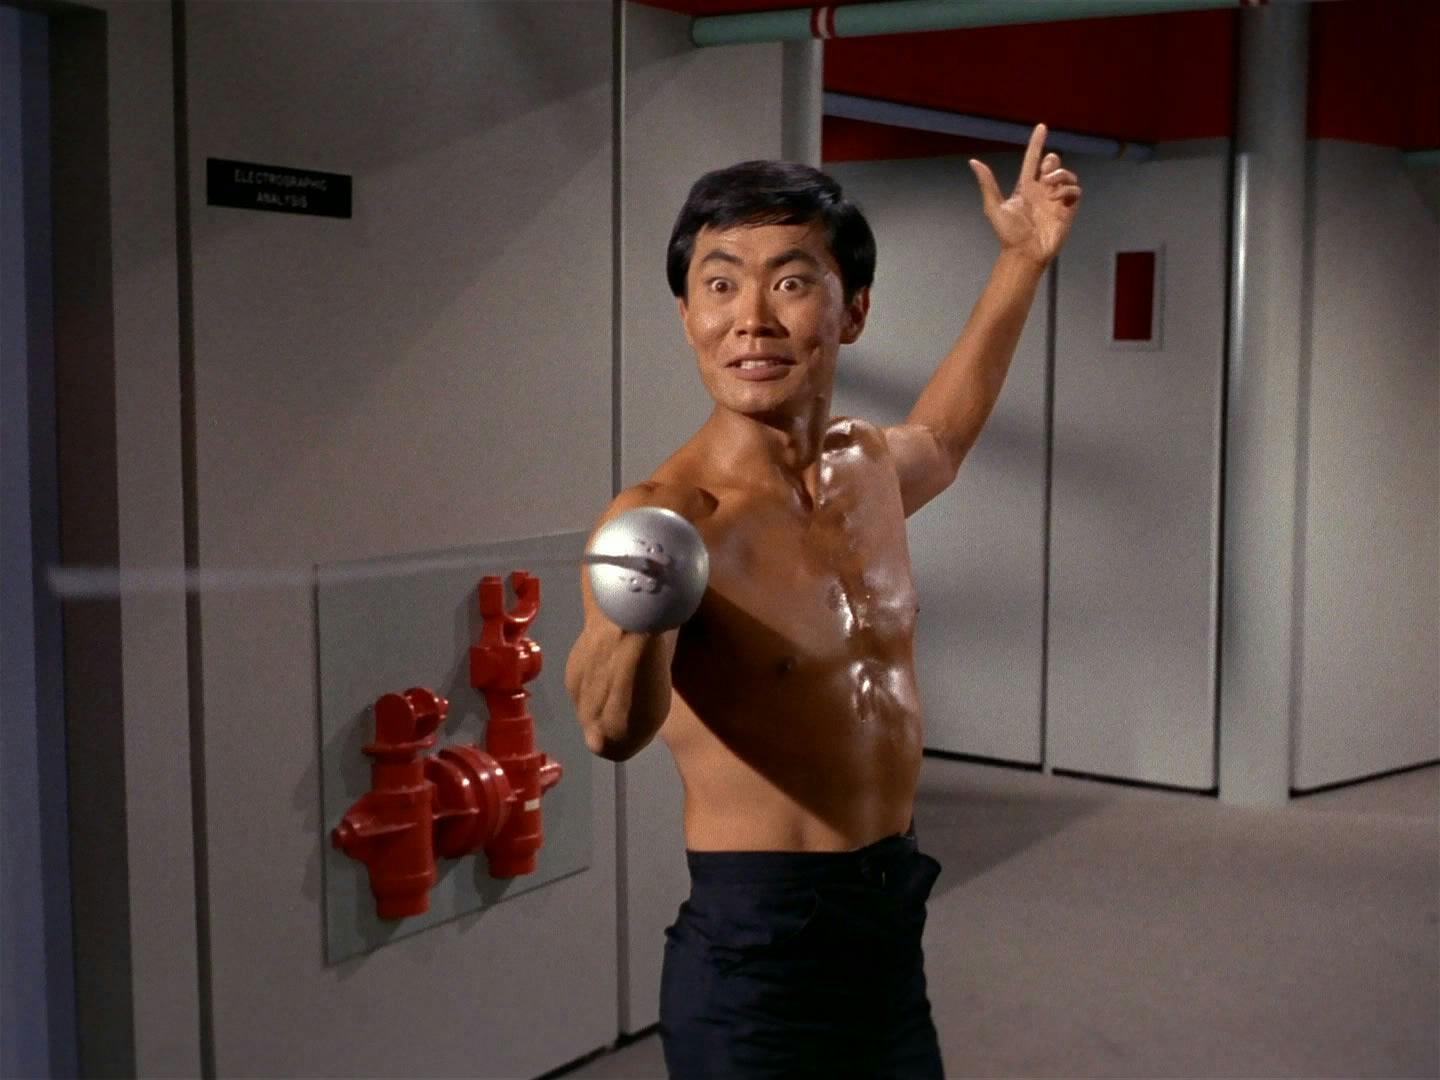 A shirtless Sulu brandishes a fencing sword